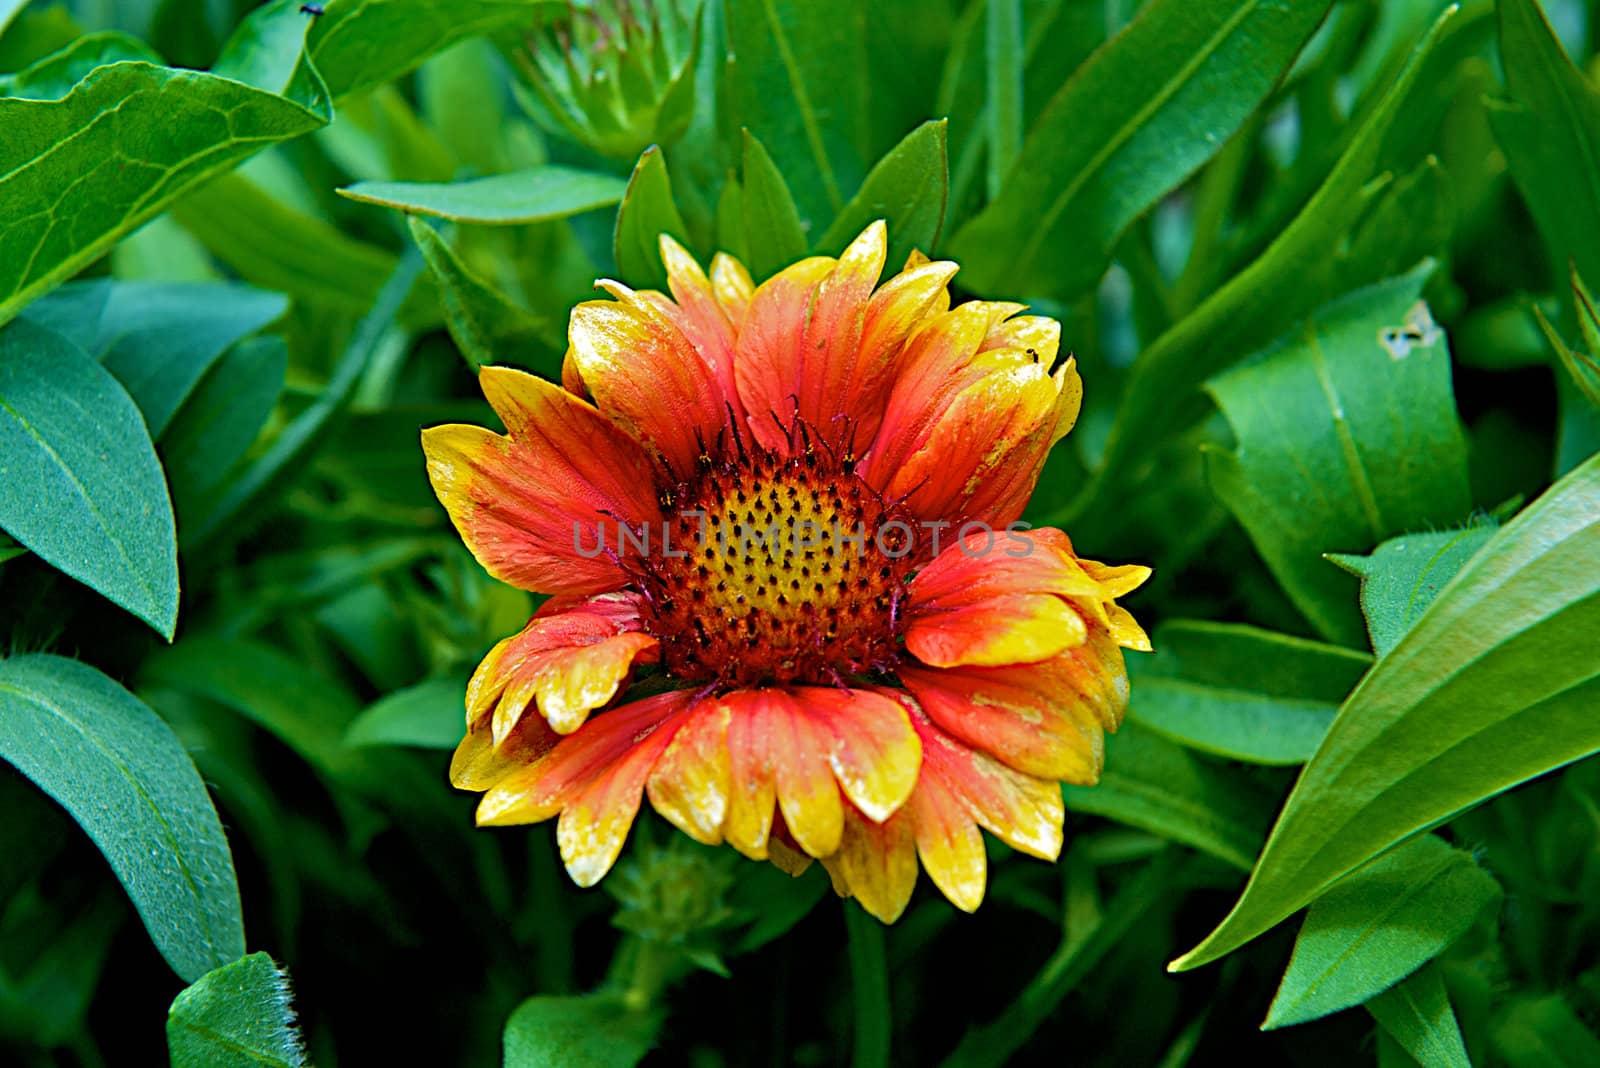 Orange and yellow sunflower in full bloom with green foliage surrounding it.